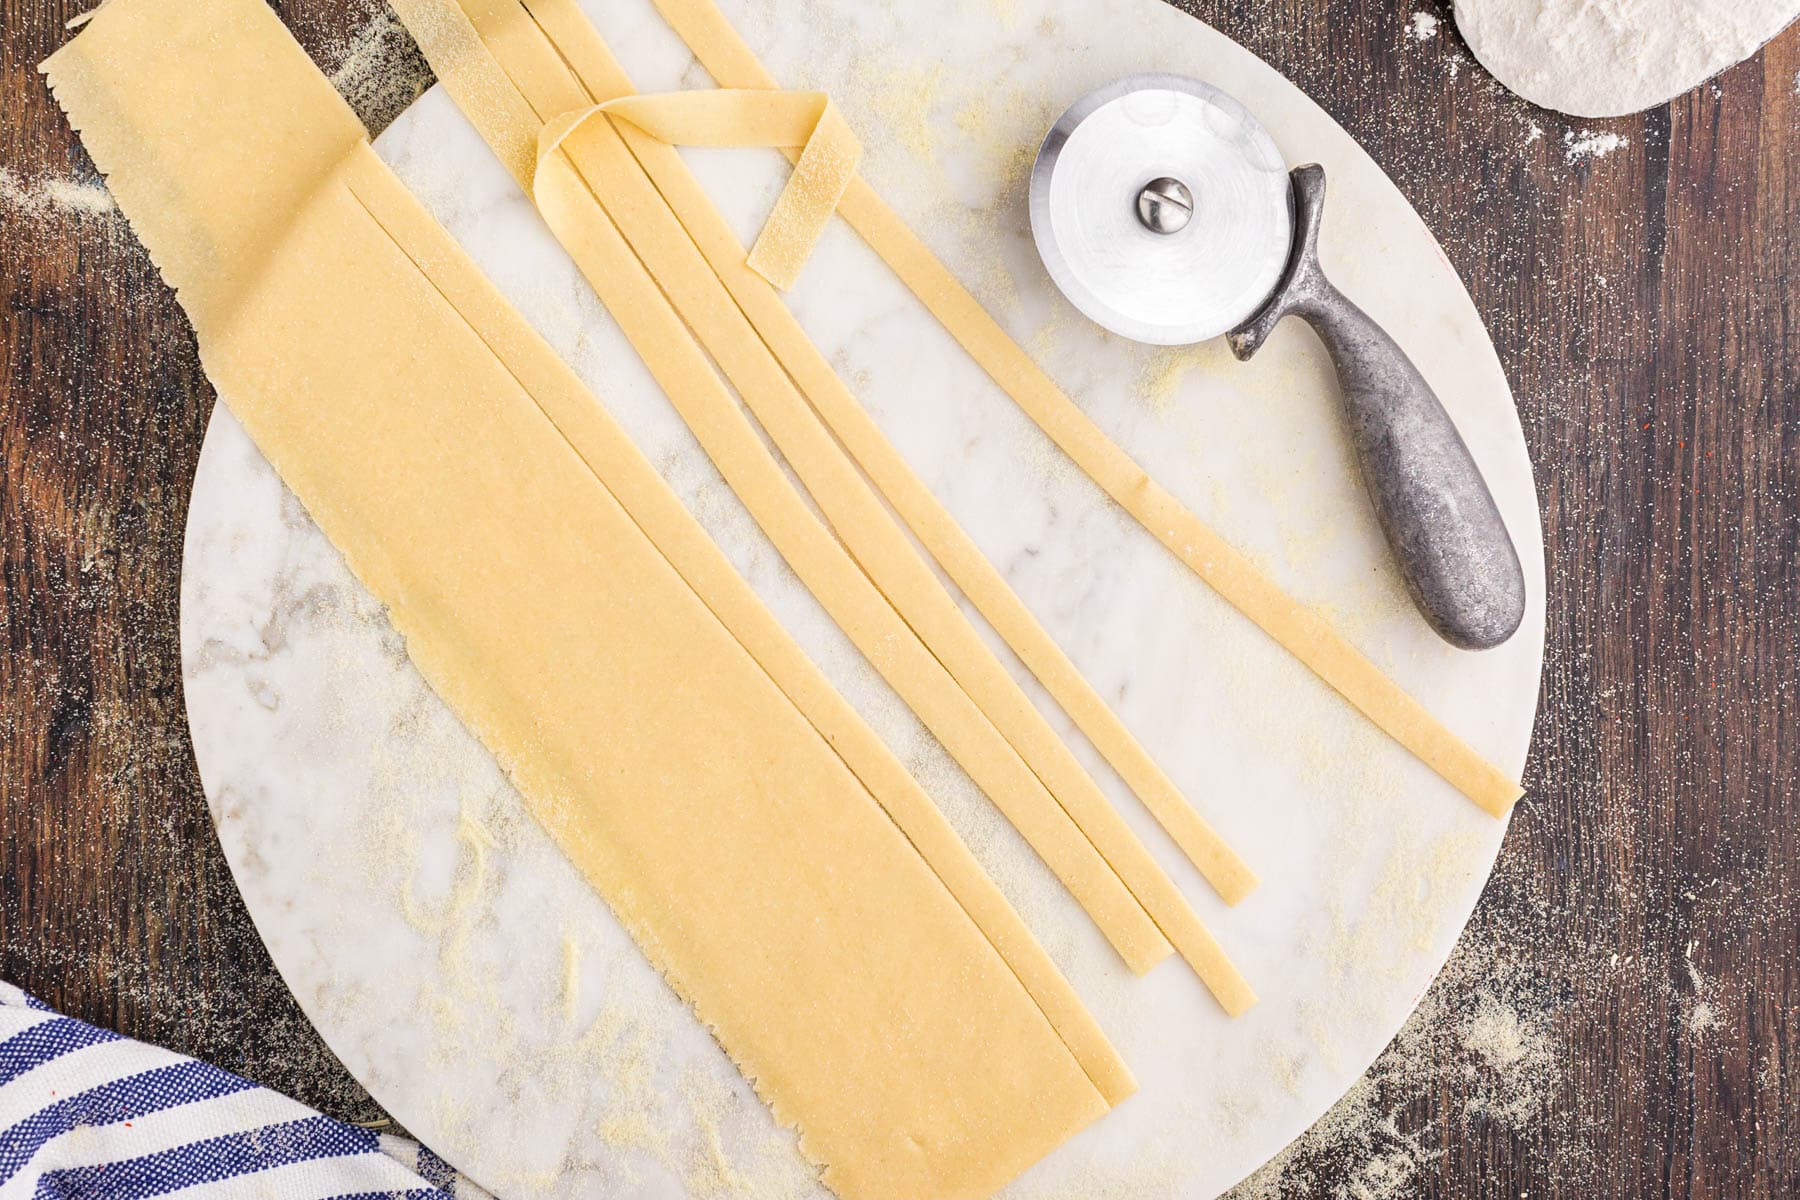 Thin fettuccine strips of pasta dough on a marble board with metal pizza cutter, striped linen, flour, on a wooden kitchen countertop.